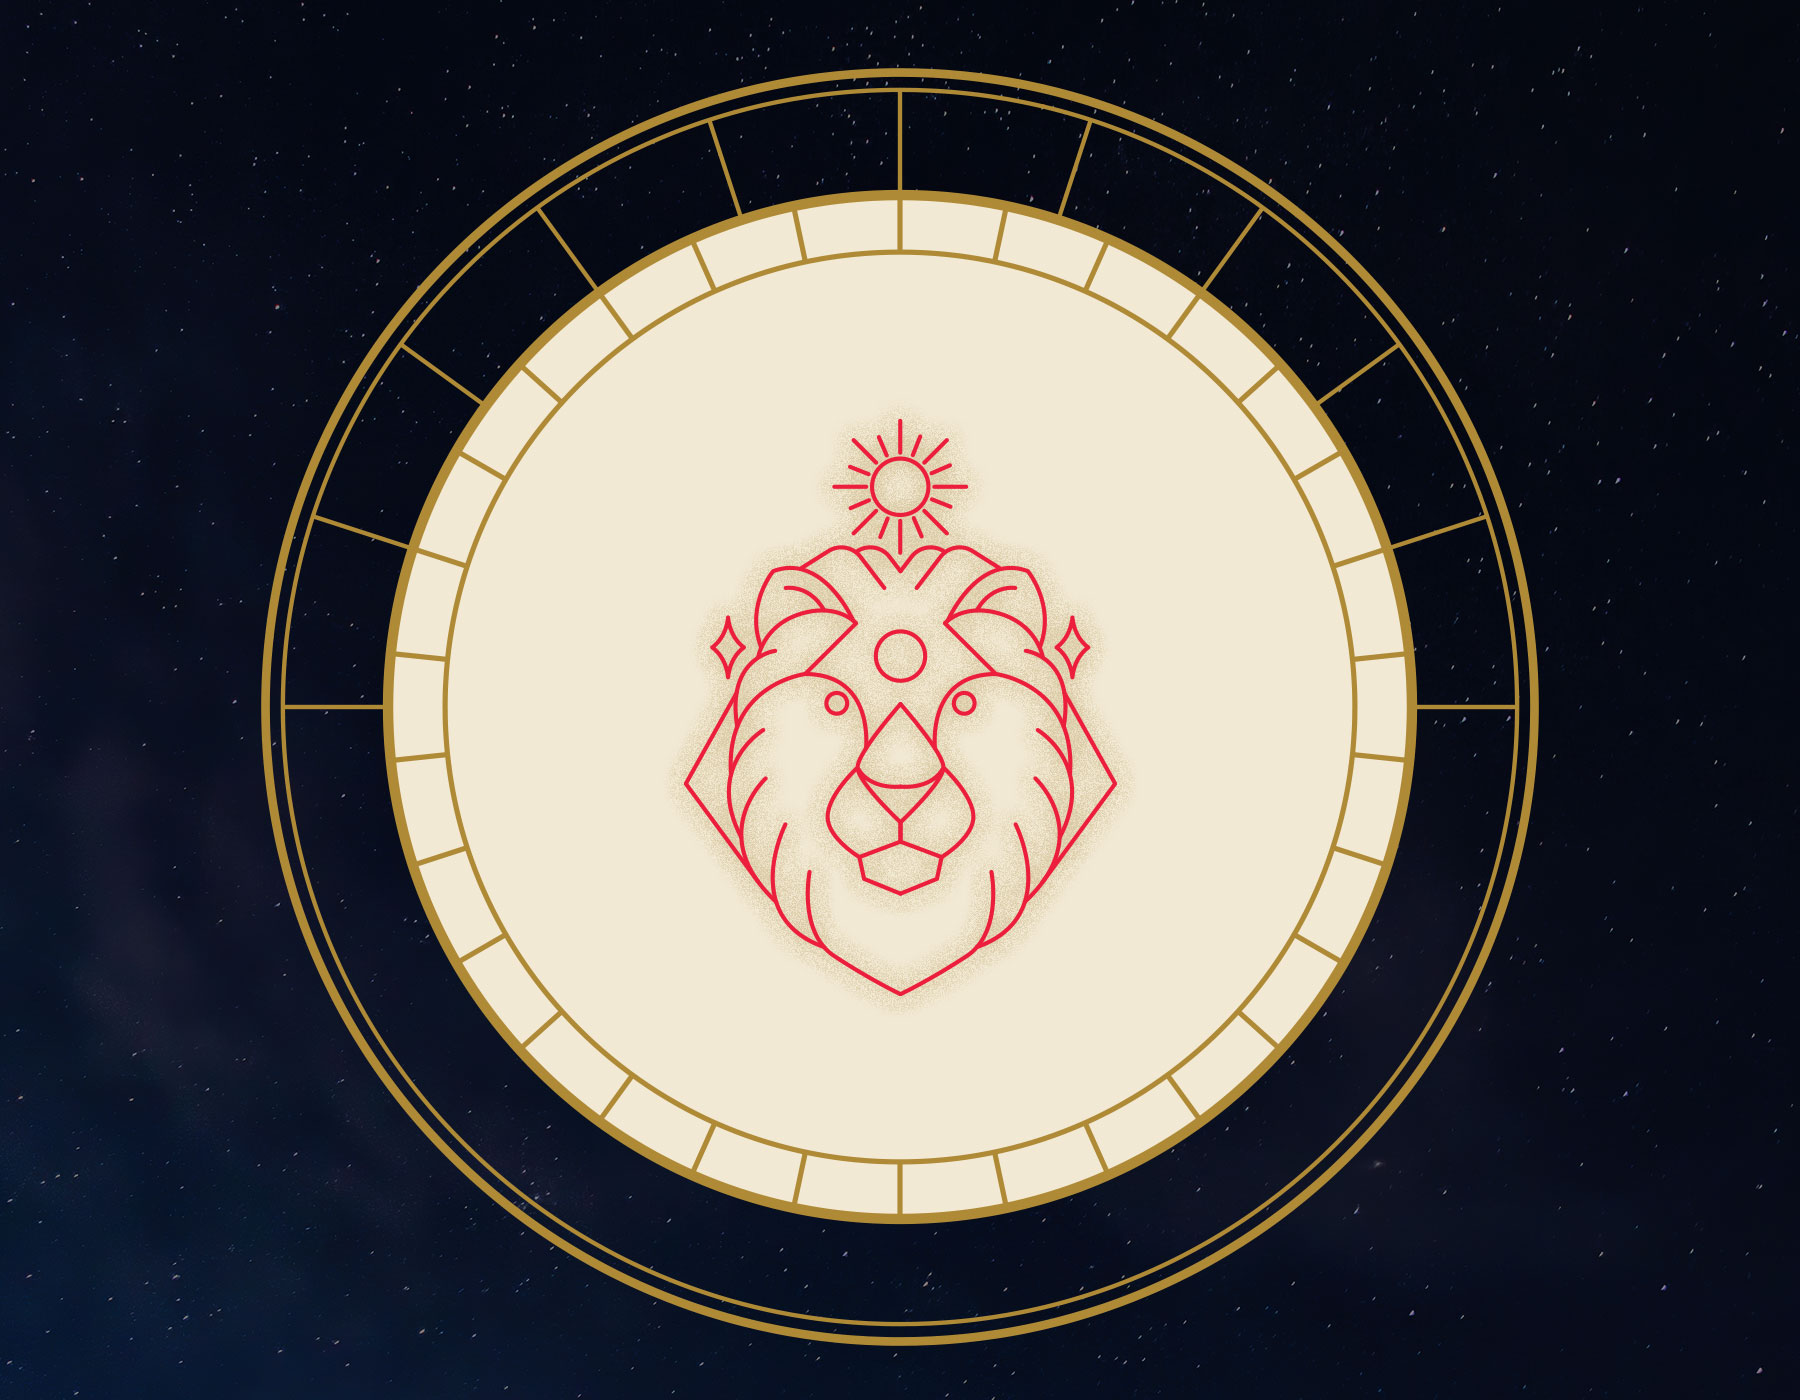 The Characteristics of Leo individual based on their Sun and Moon signs